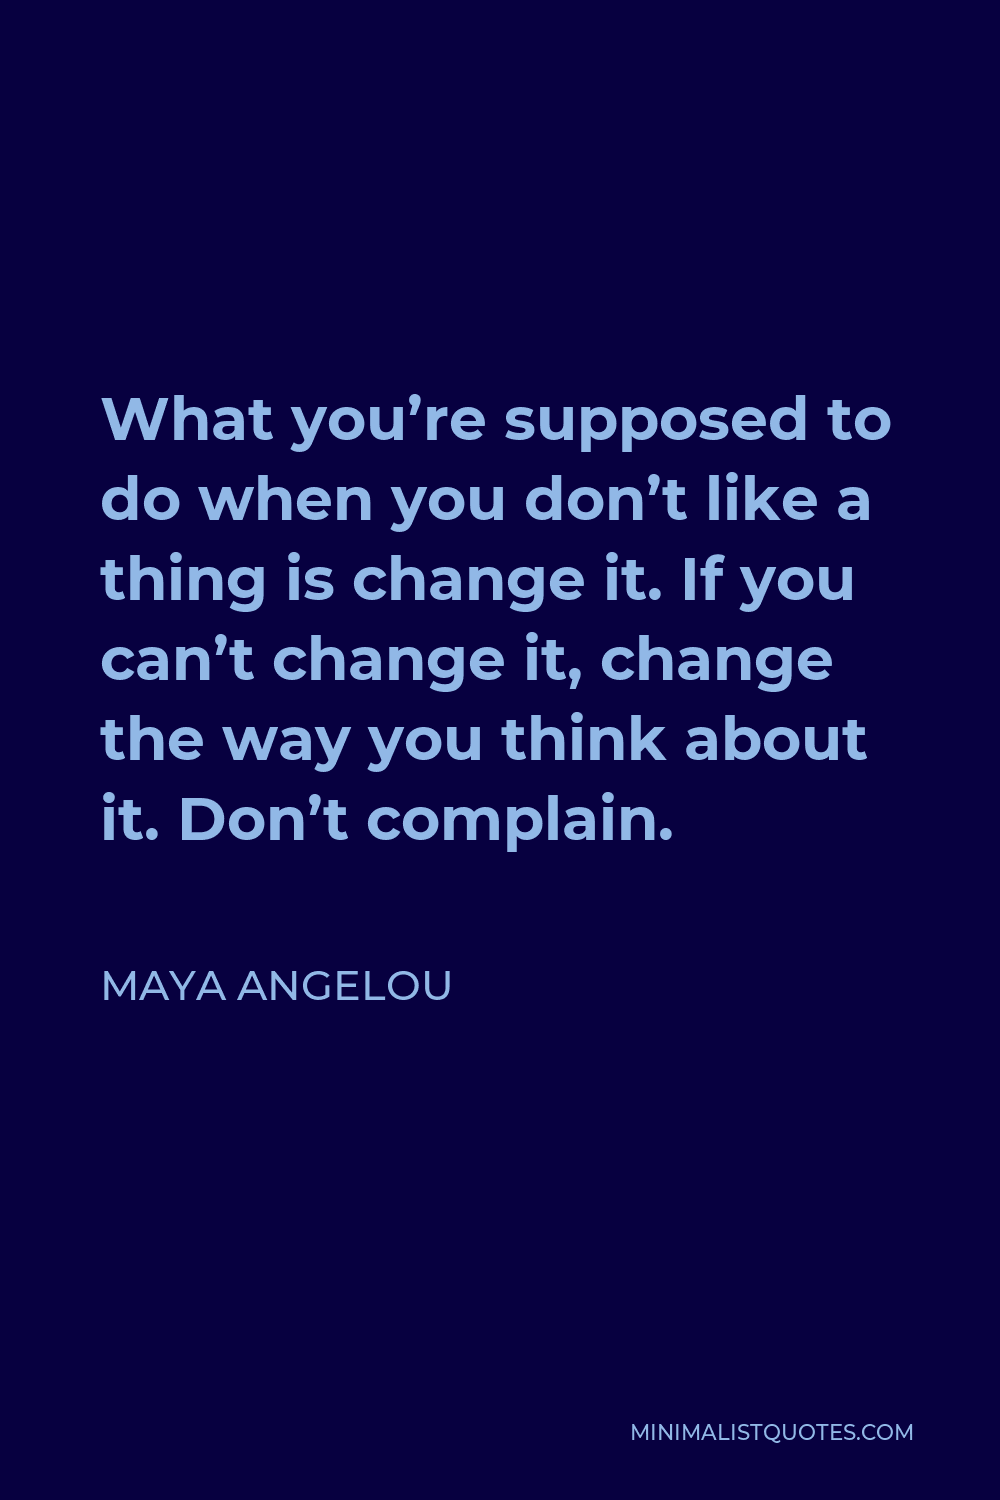 Maya Angelou Quote - What you’re supposed to do when you don’t like a thing is change it. If you can’t change it, change the way you think about it. Don’t complain.